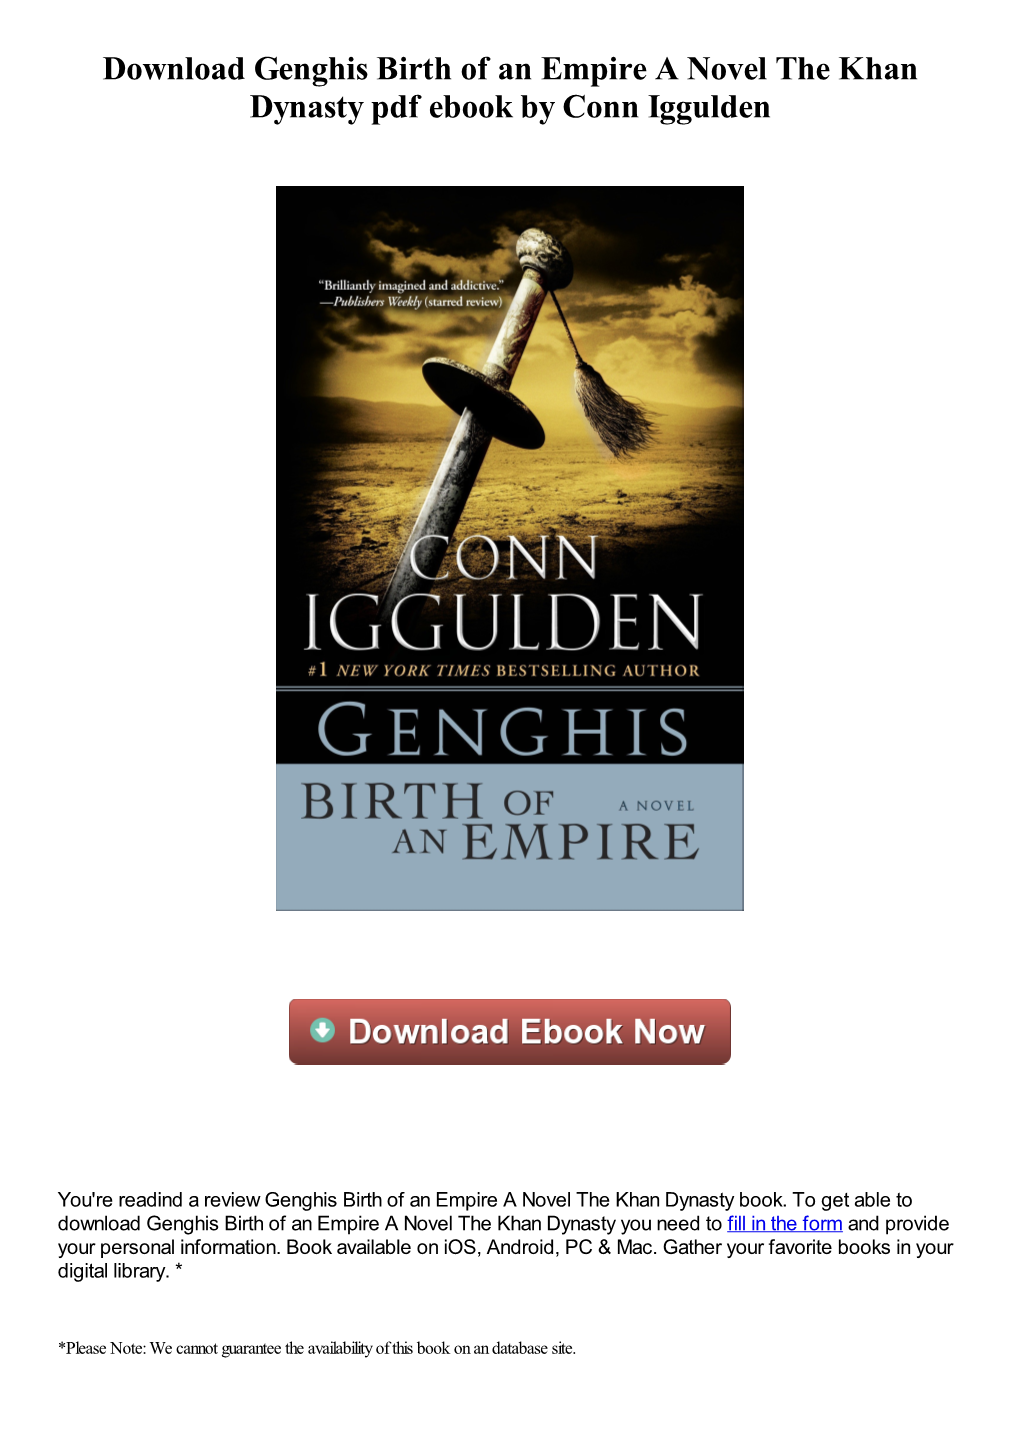 Download Genghis Birth of an Empire a Novel the Khan Dynasty Pdf Ebook by Conn Iggulden